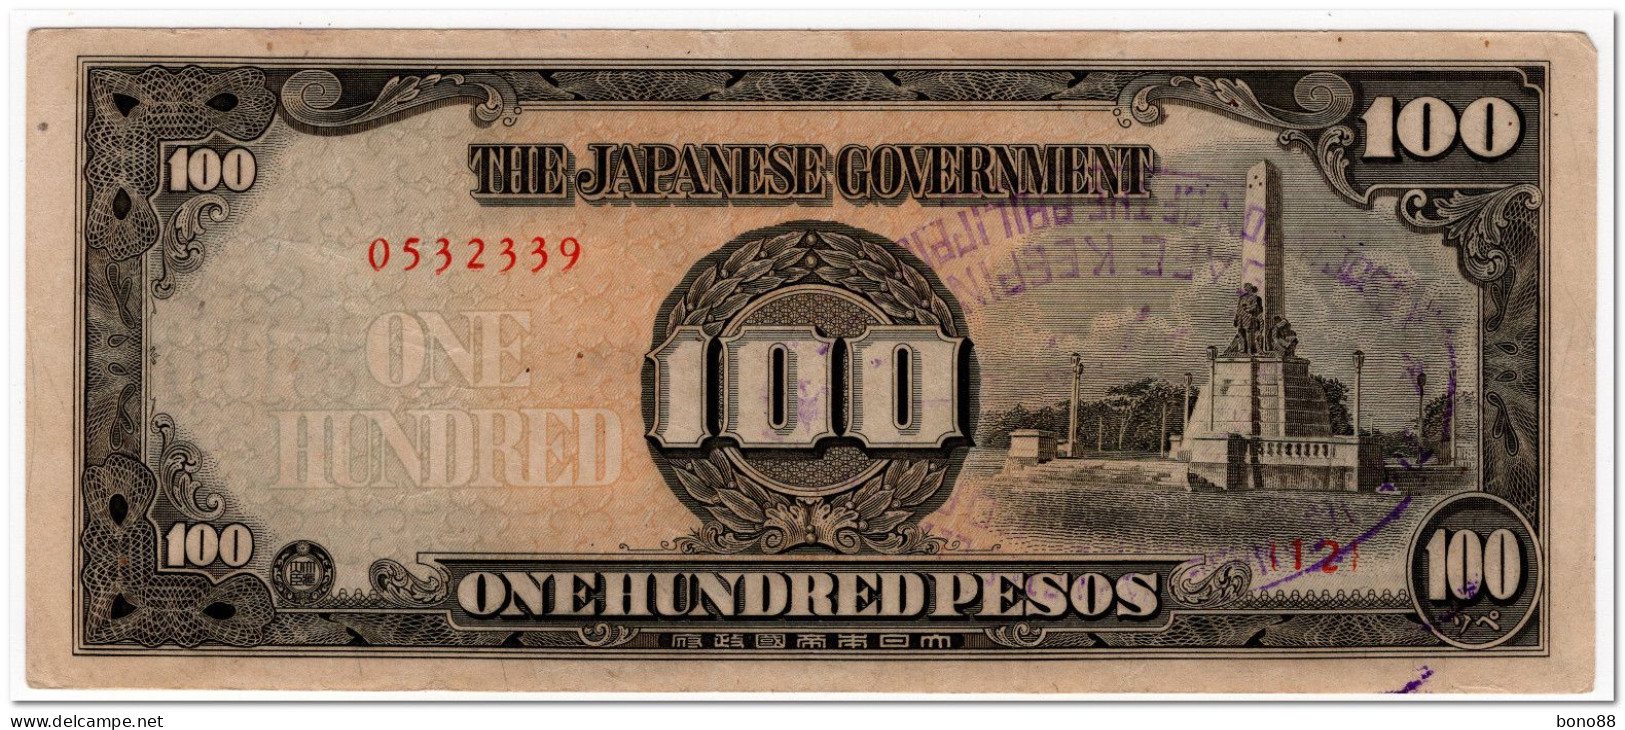 PHILIPPINES,JAPANESE OCCUPATION, WITH STAMP,10 PESOS,1944,P.112,XF - Philippines